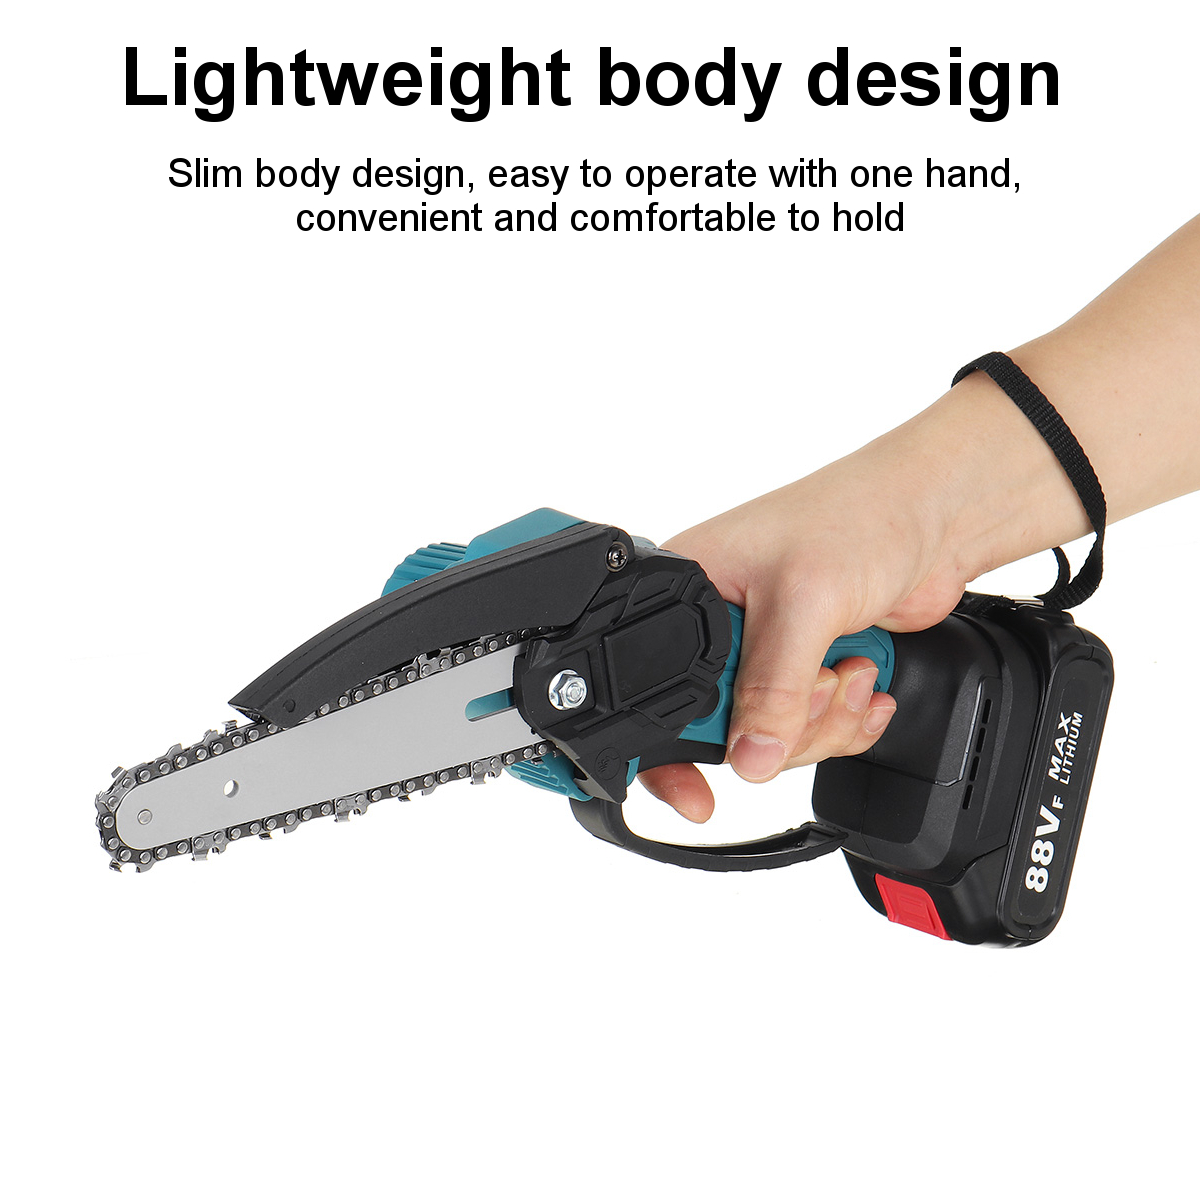 88VF-Electric-Saw-Cordless-6-Inch-One-Hand-Chain-Saws-Woodworking-Cutting-Tool-W-1-Battery-1855400-5